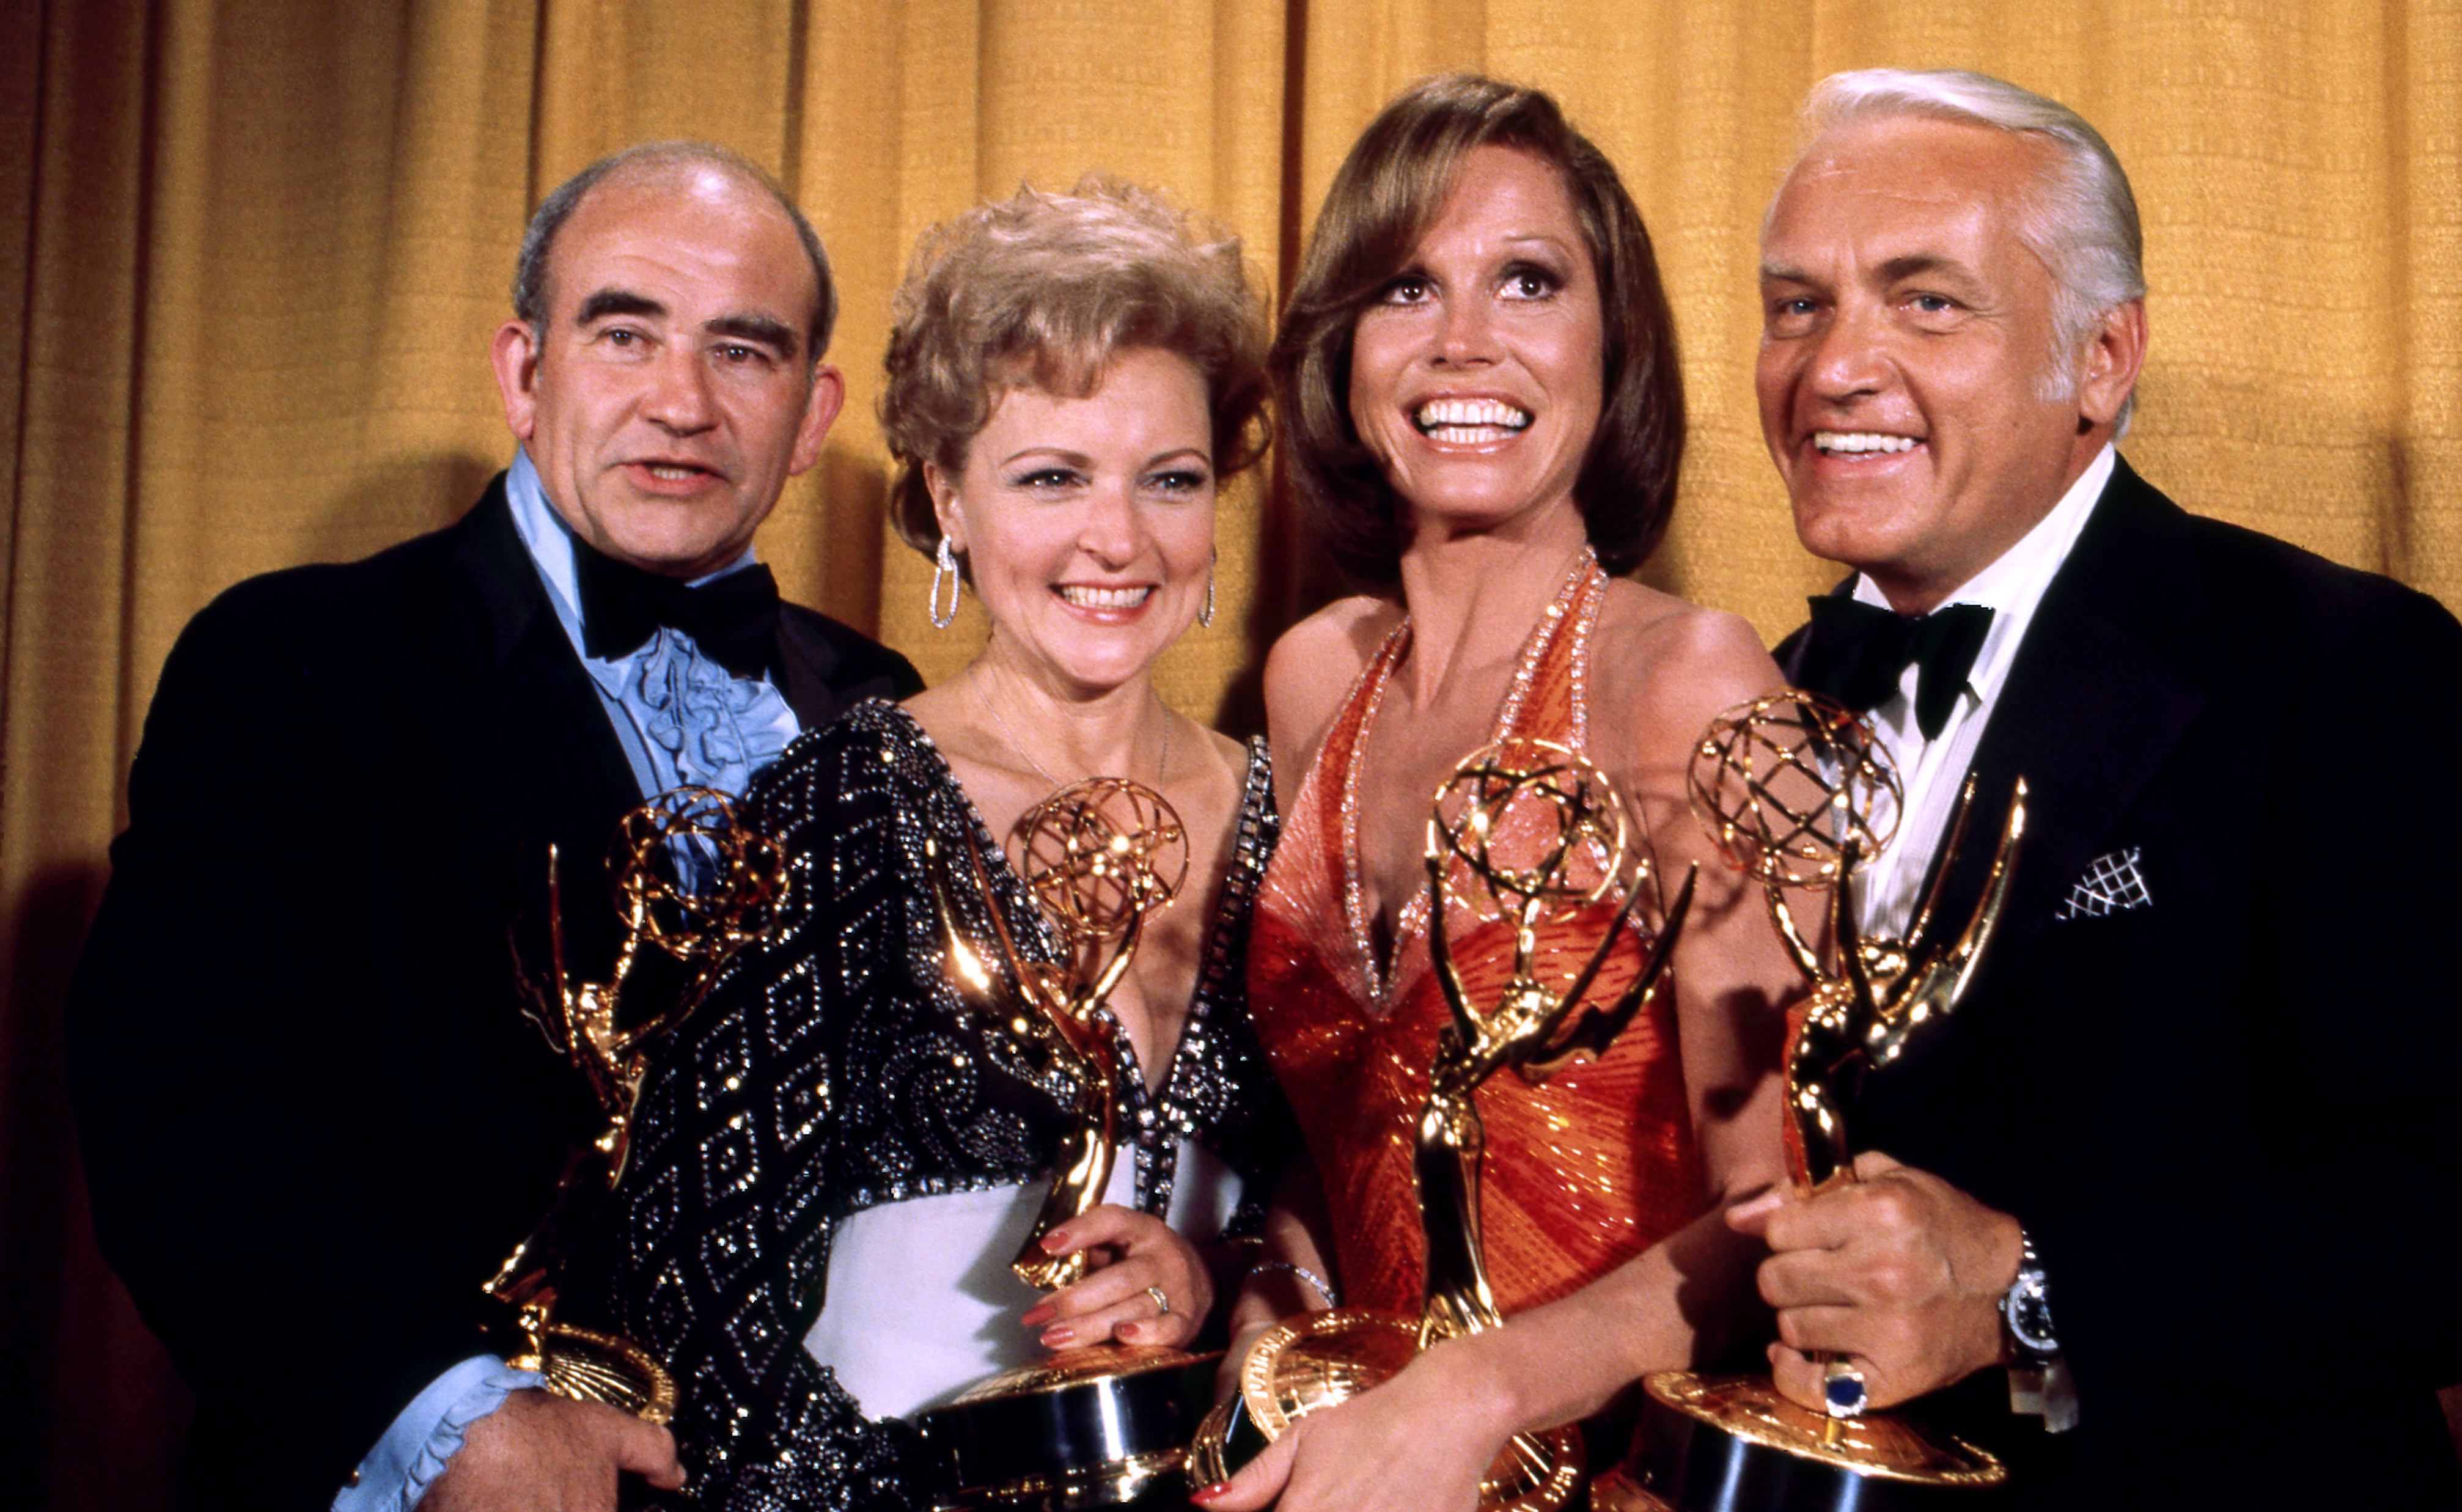 Edward Asner, Betty White, Mary Tyler Moore and Ted Knight holding their Emmy Awards in the press room at the 28th Annual Primetime Emmy Awards on May 17, 1976 at The Shubert Theatre in Los Angeles, California. (ABC Photo Archives—ABC via Getty Images)